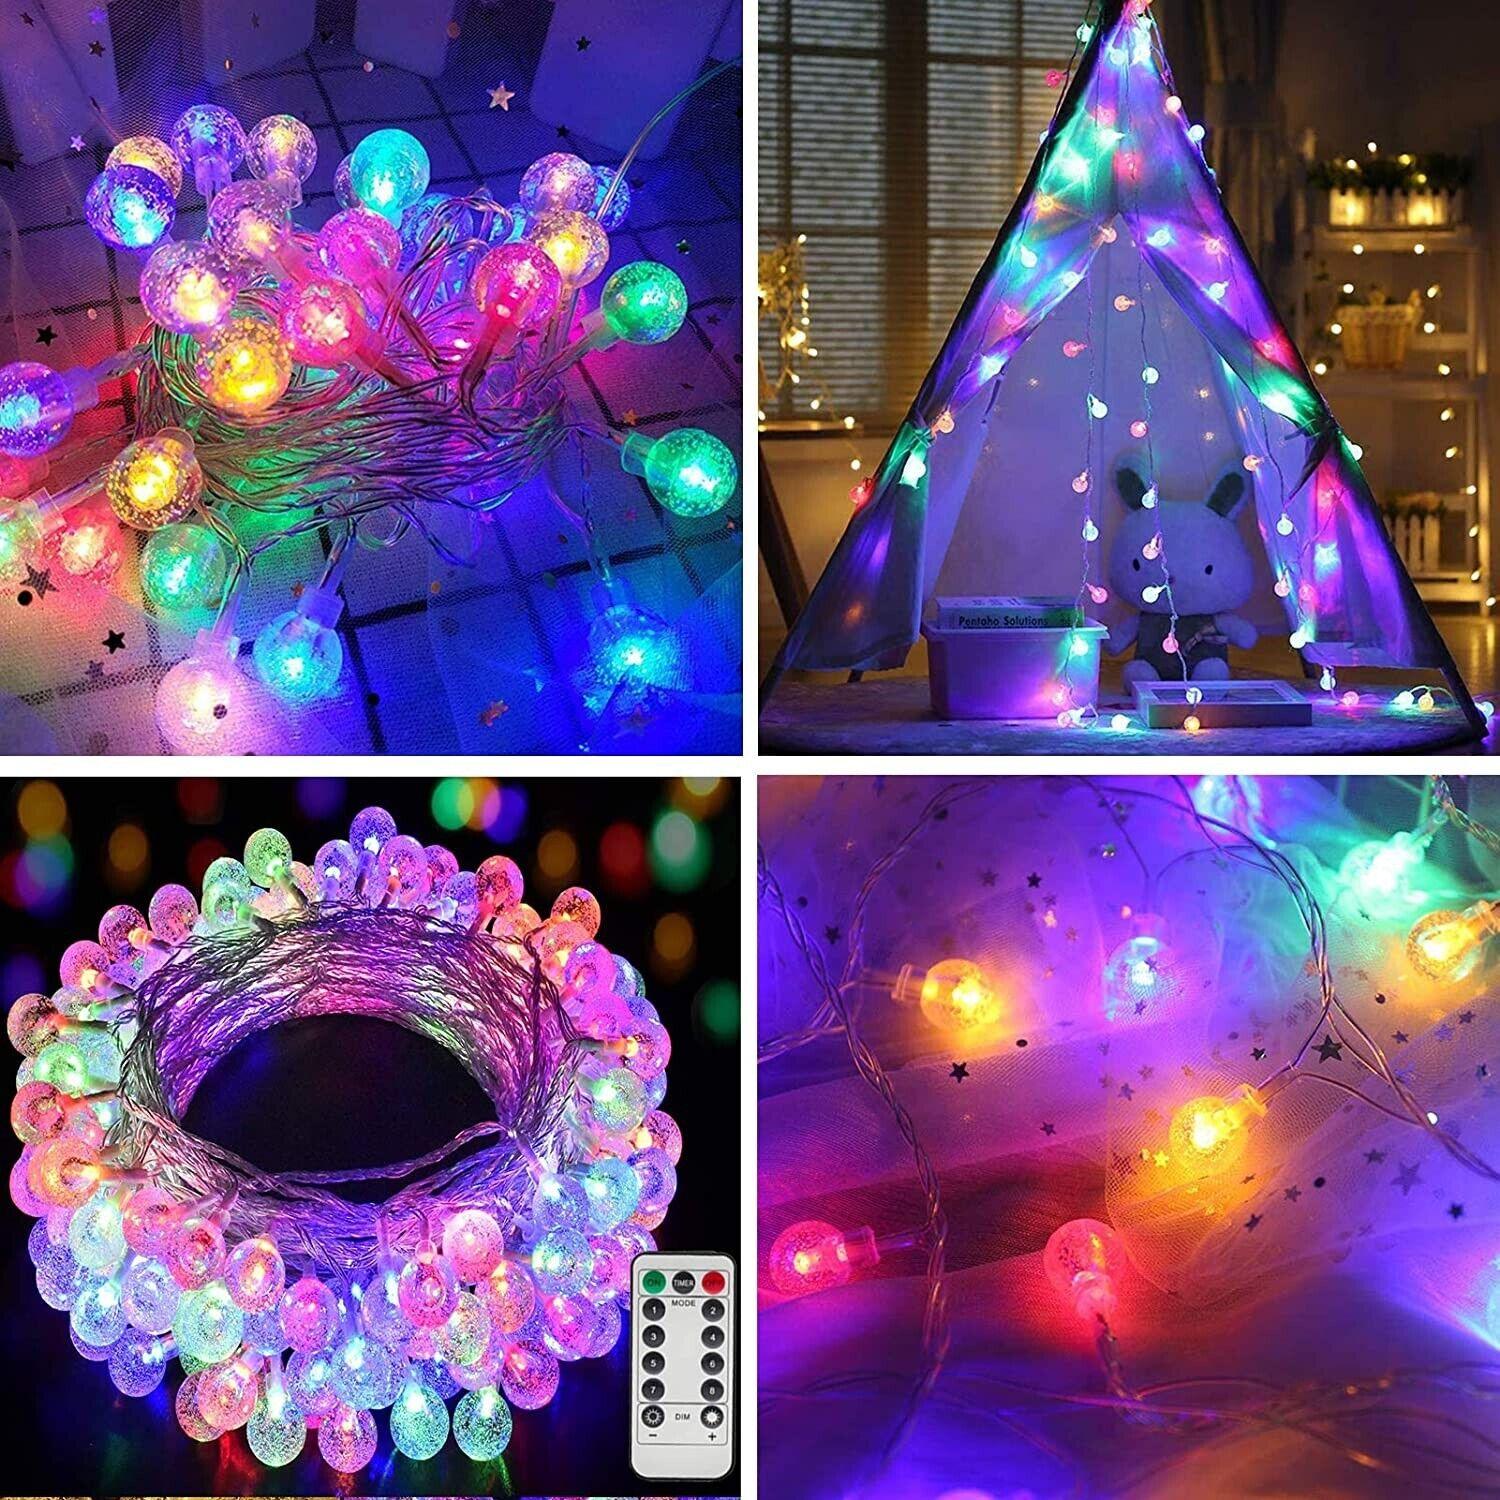 50 LED/Lights Crystal Globe String Lights Battery Operated 24ft Remote - Massive Discounts